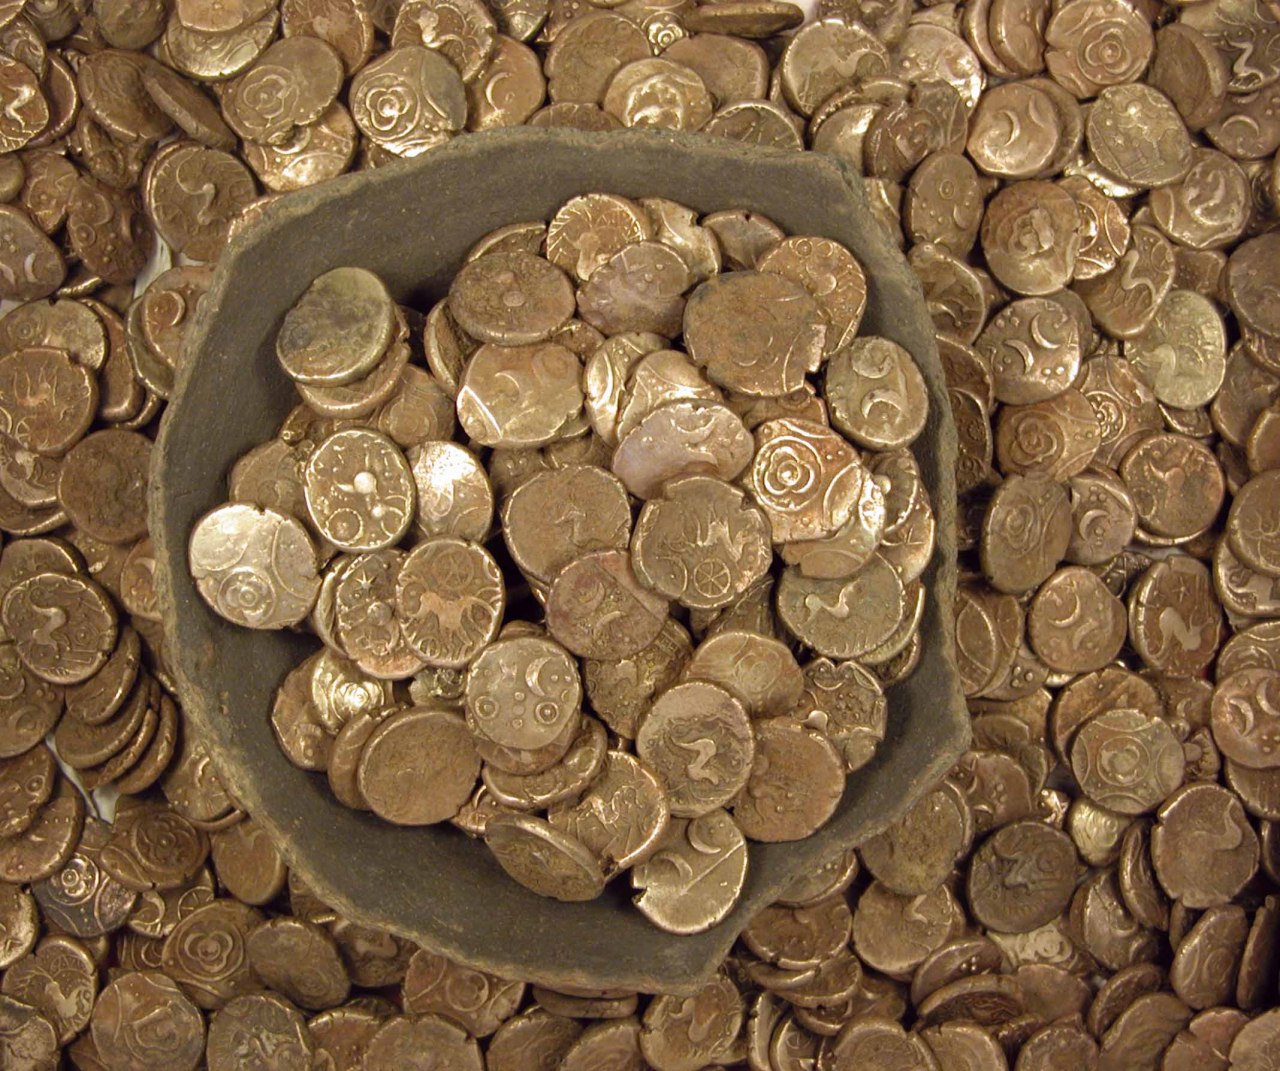 Coin dating archaeology